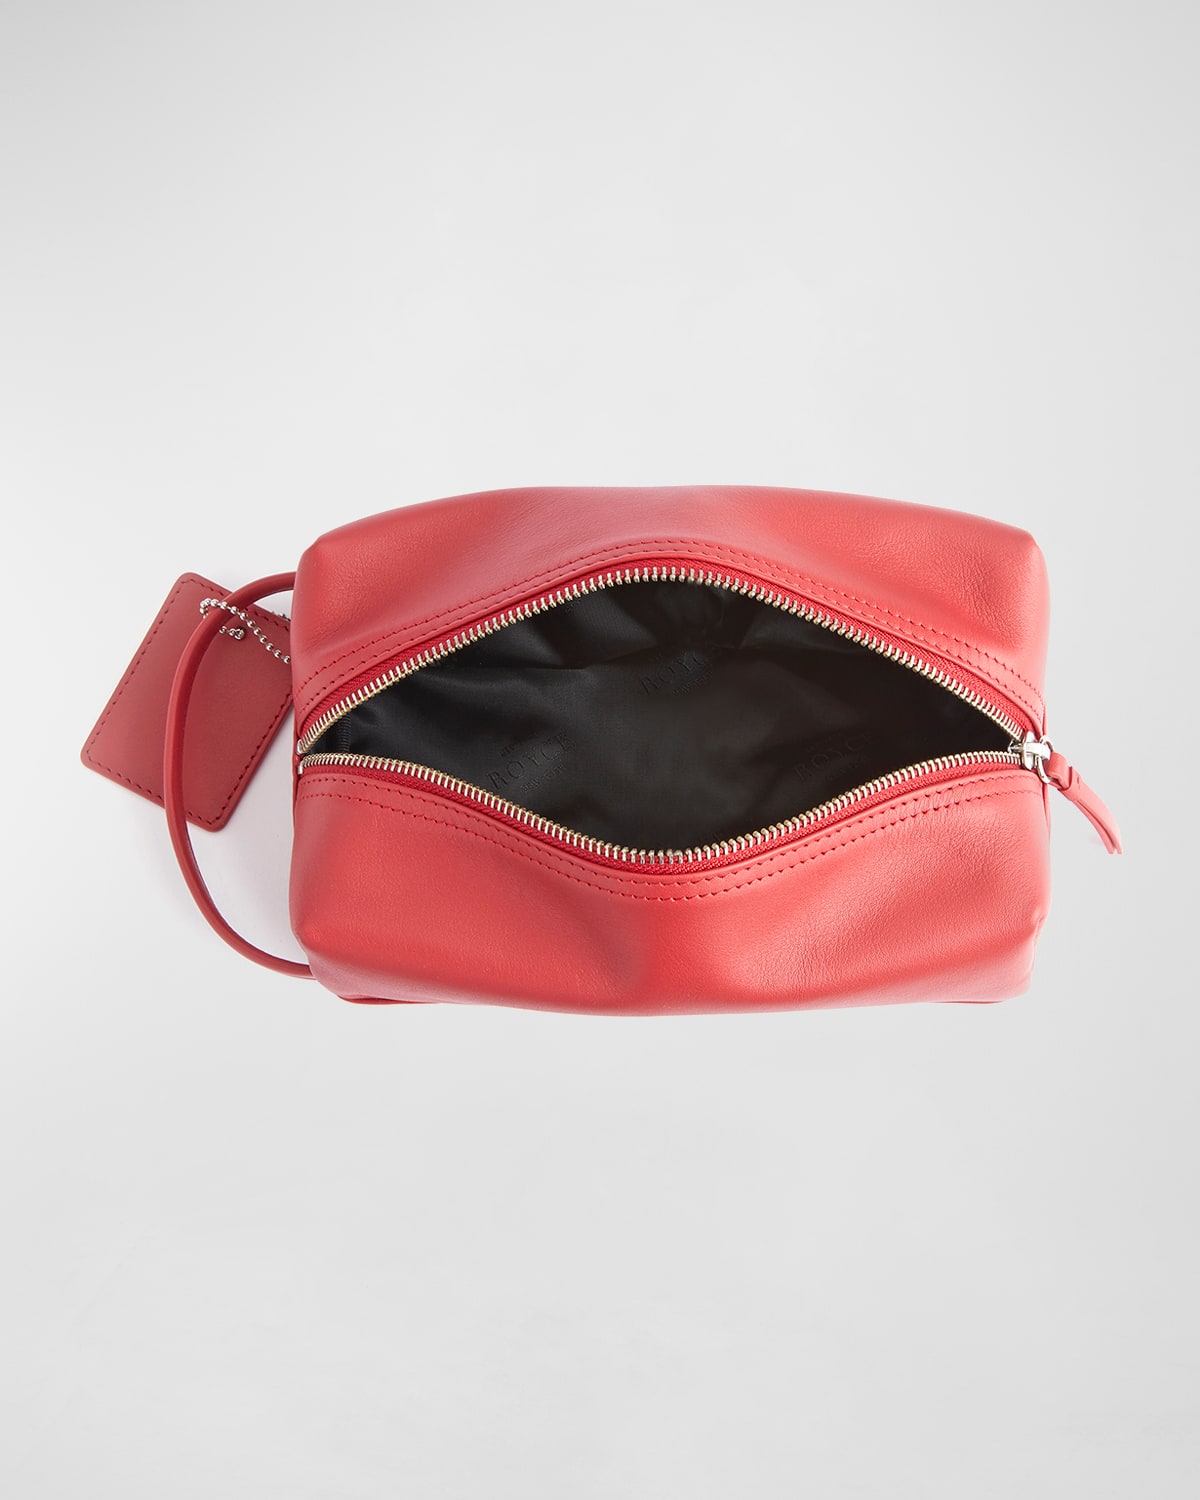 Royce New York Compact Leather Toiletry Bag In Red